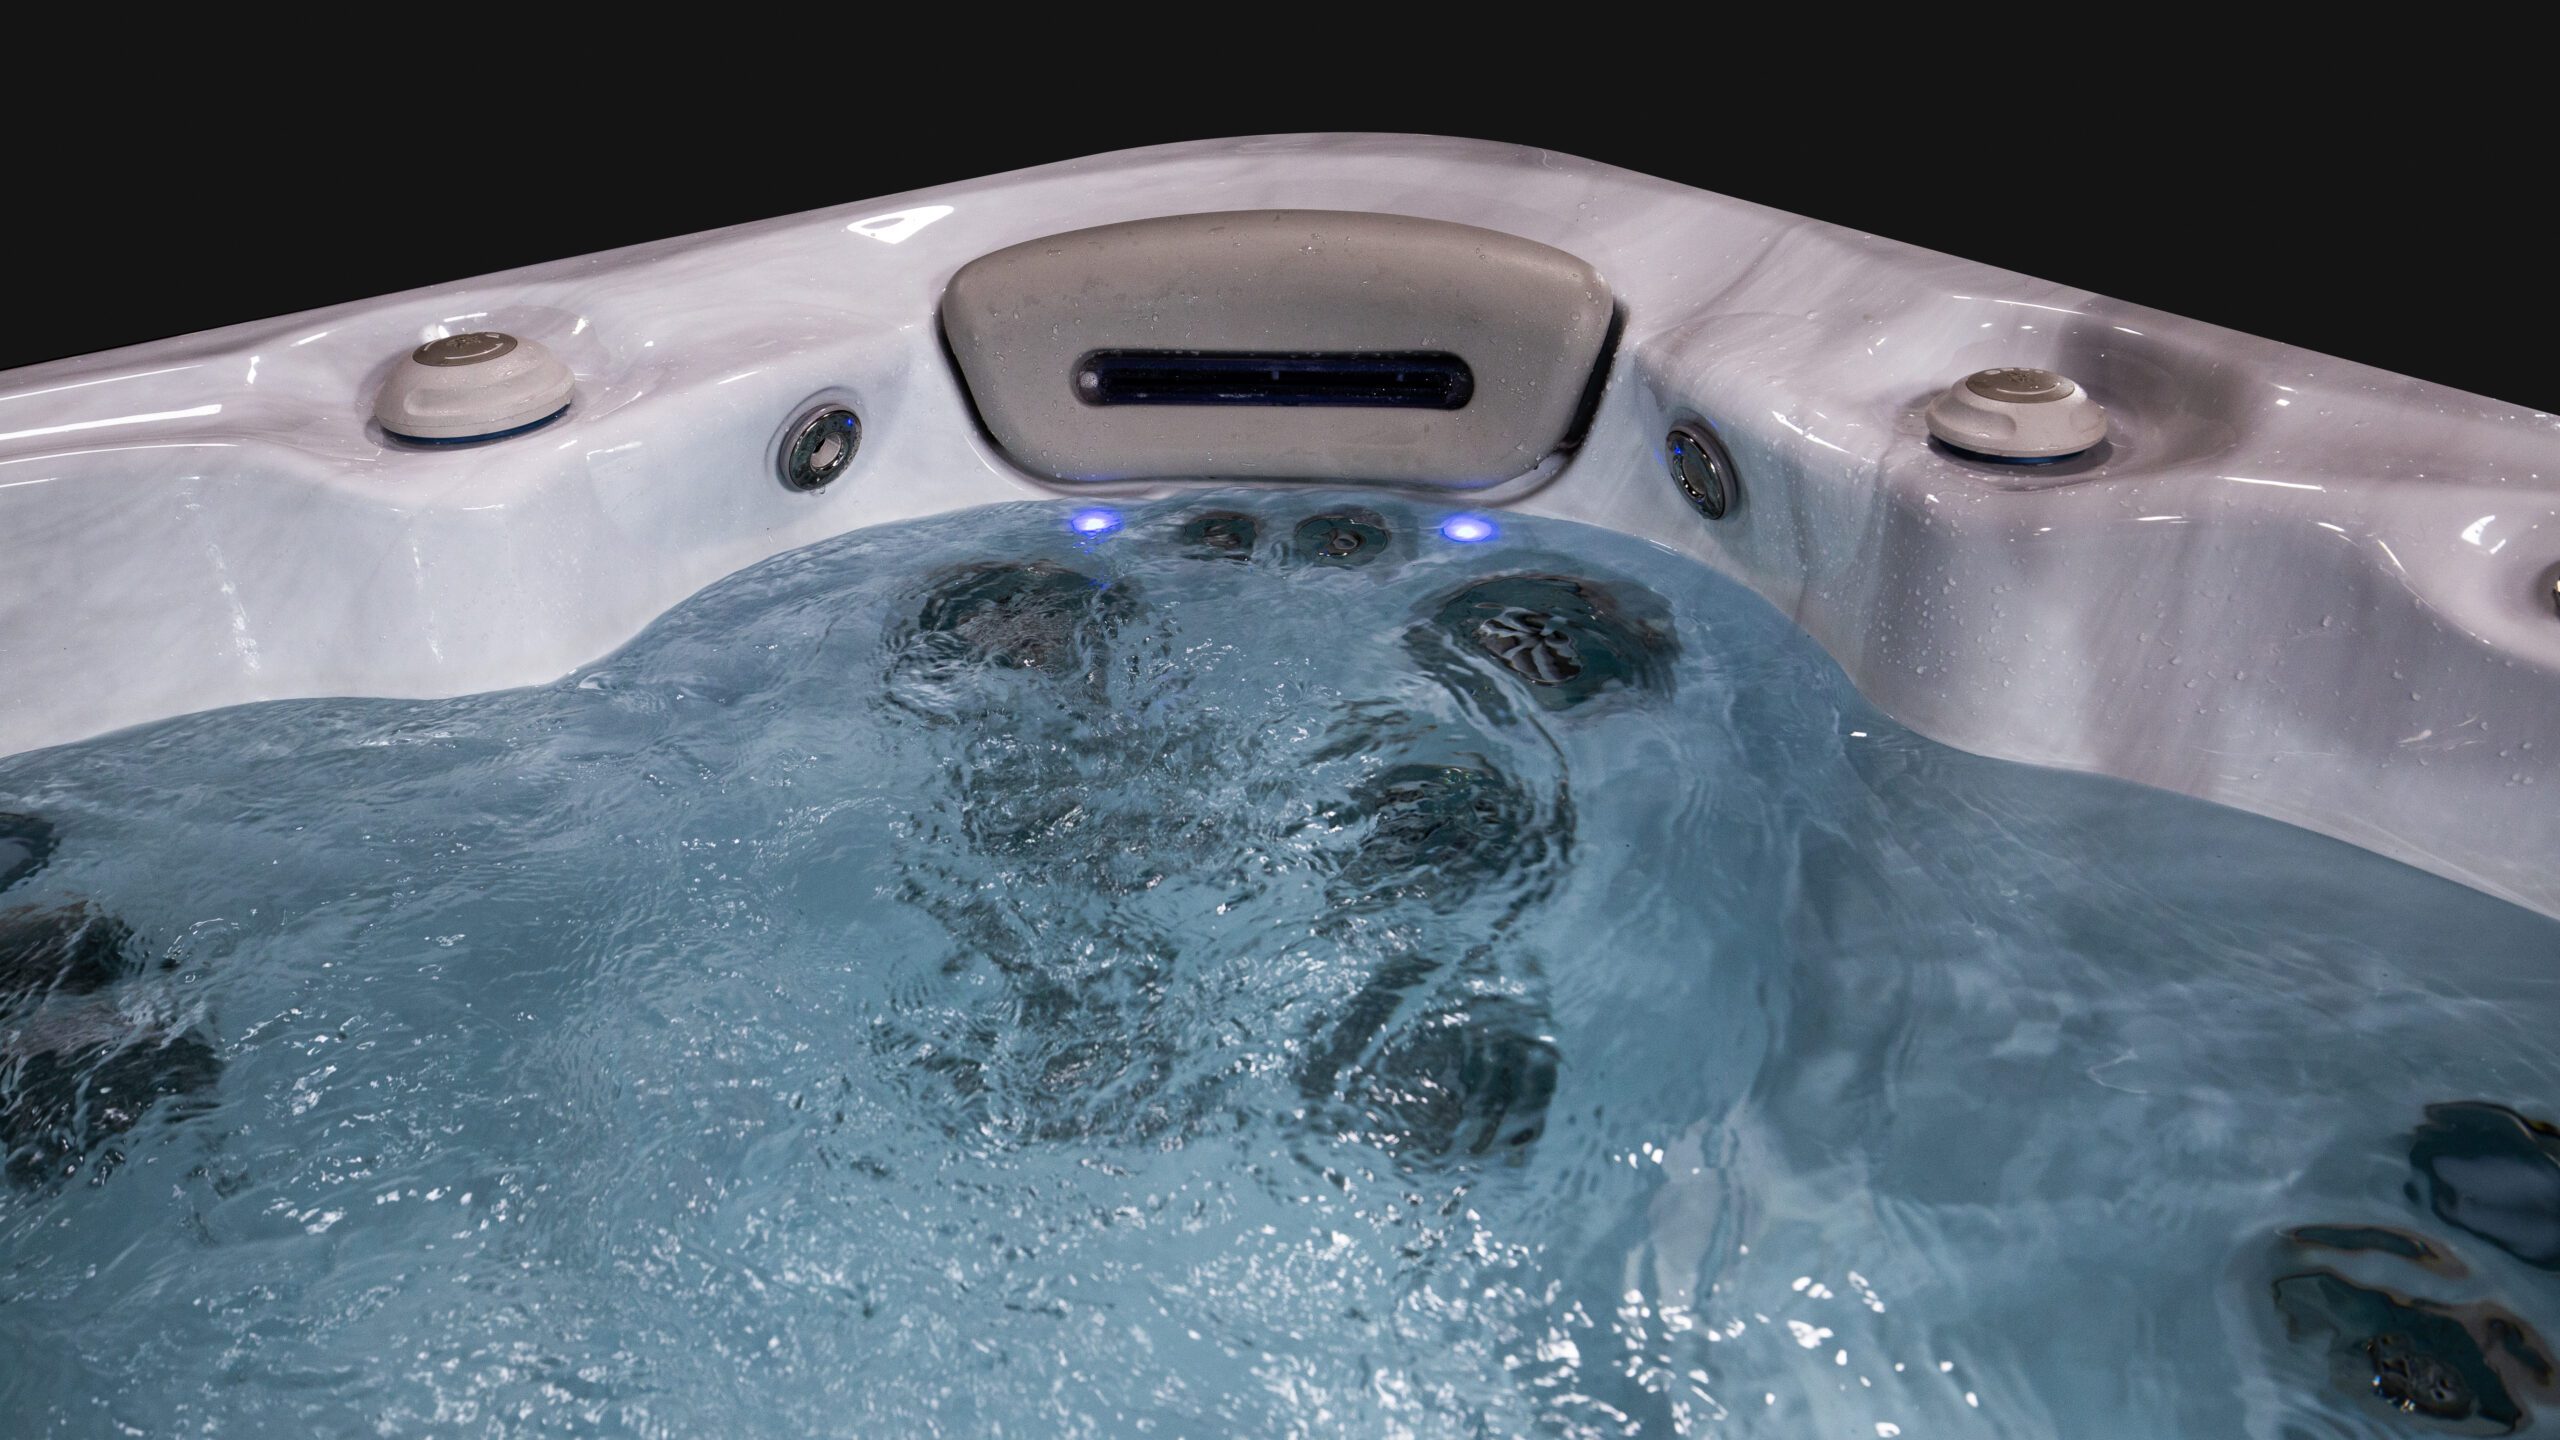 Hydropool hot tub with water and lights - Lunar Lagoons Ohio